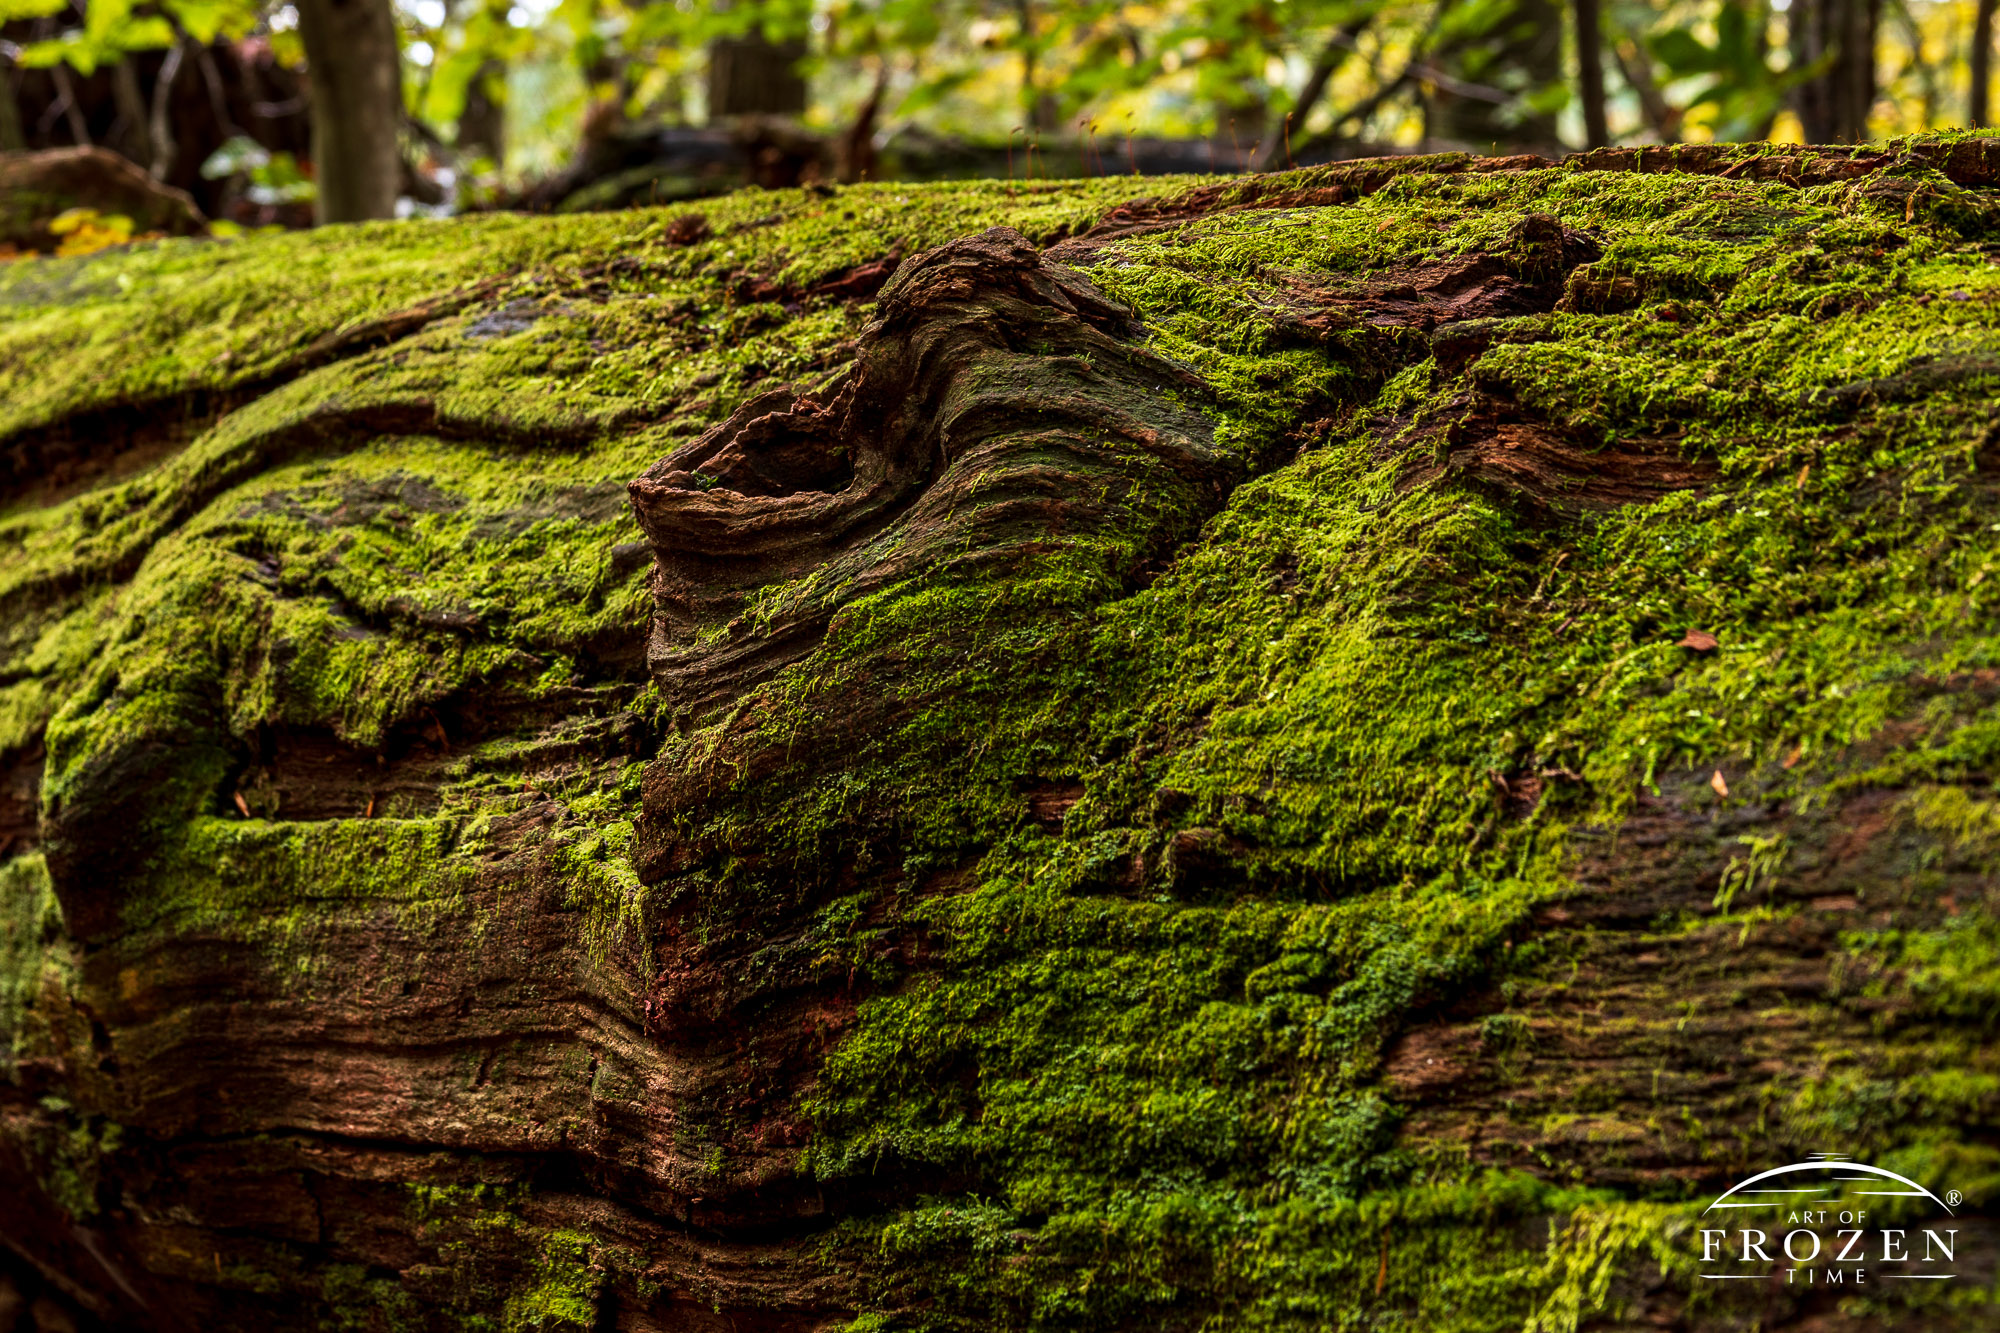 A decaying log with bright green most covering its surface